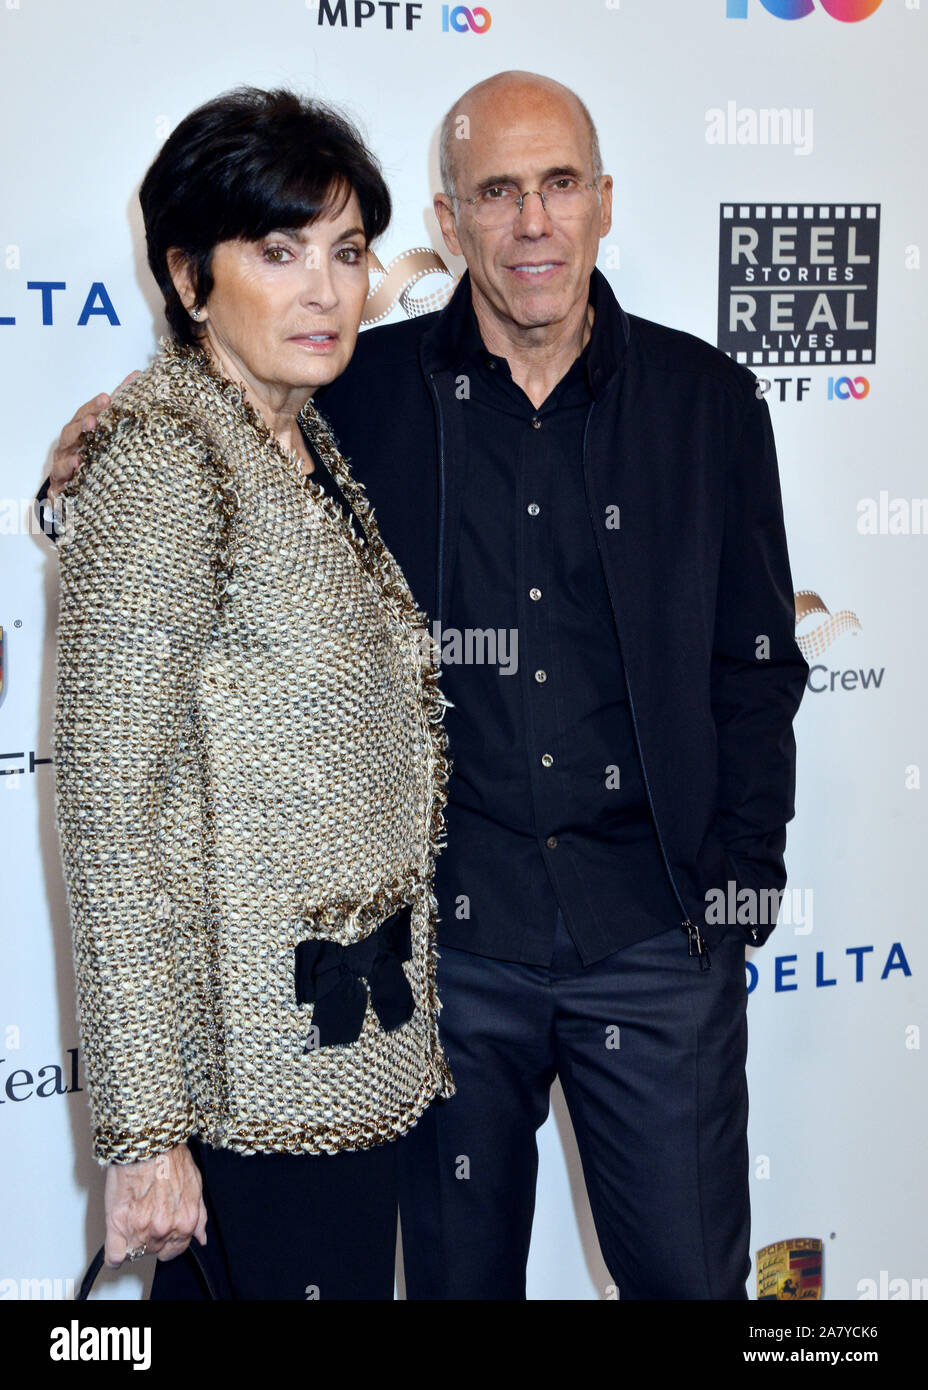 Los Angeles, USA. 04th Nov, 2019. Marilyn Katzenberg, Jeffrey Katzenberg arrives at MPTF's 8th Annual Reel Stories, Real Lives Event at the Directors Guild Of America on November 04, 2019 in Los Angeles, California Credit: Tsuni/USA/Alamy Live News Stock Photo